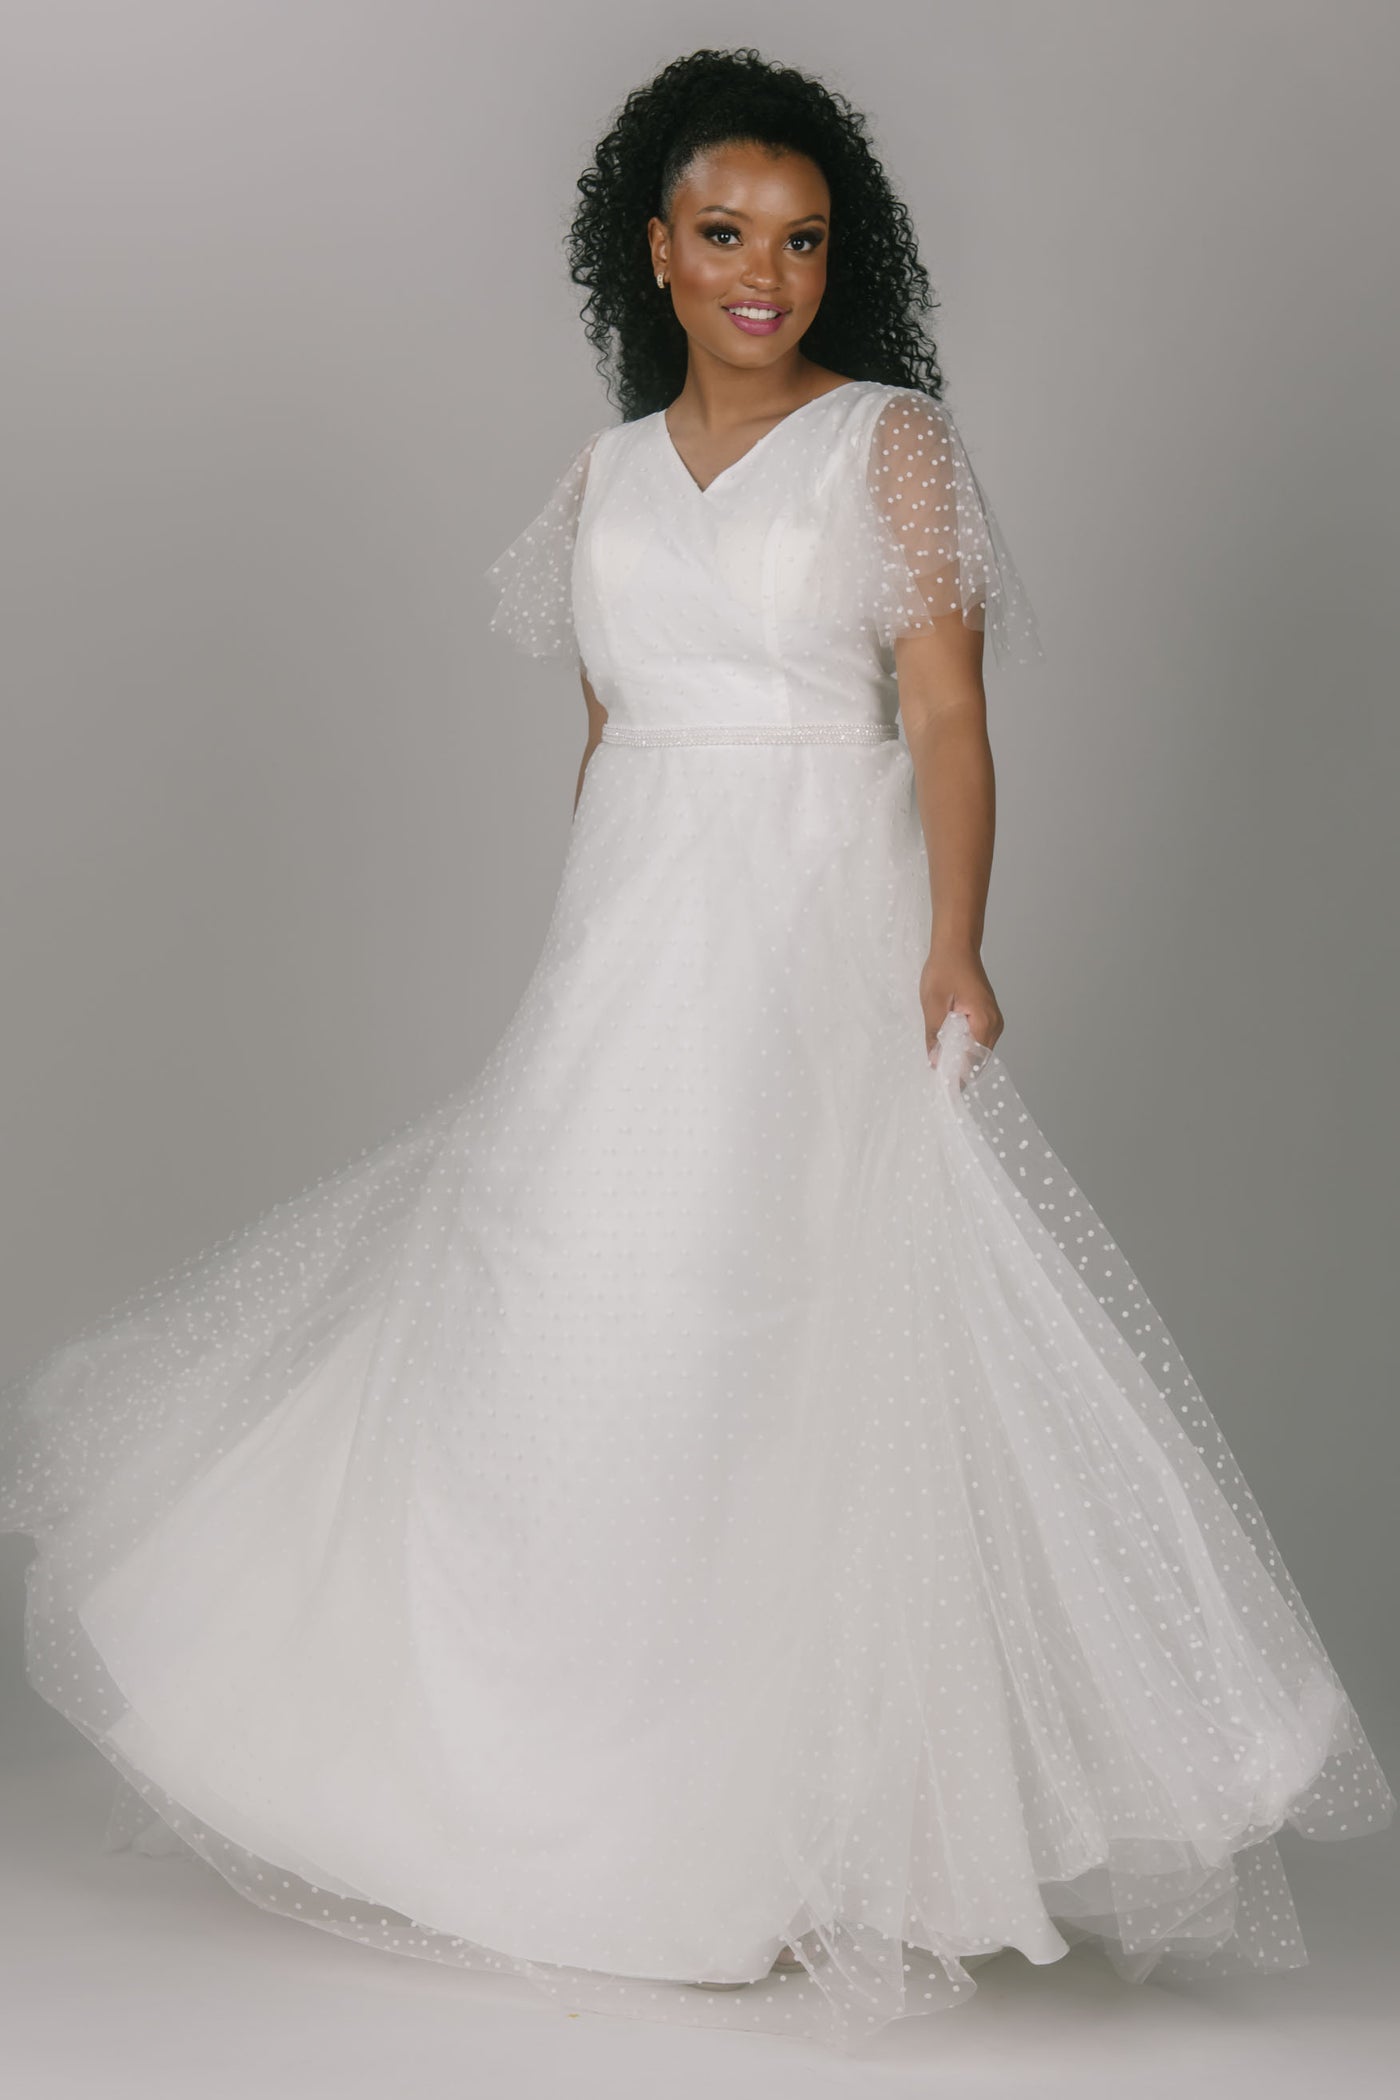 Party modest wedding dress with swiss dots. This dress has flutter sleeves and a sparkly thin belt. This v-neckline dress is the perfect modest wedding dress.